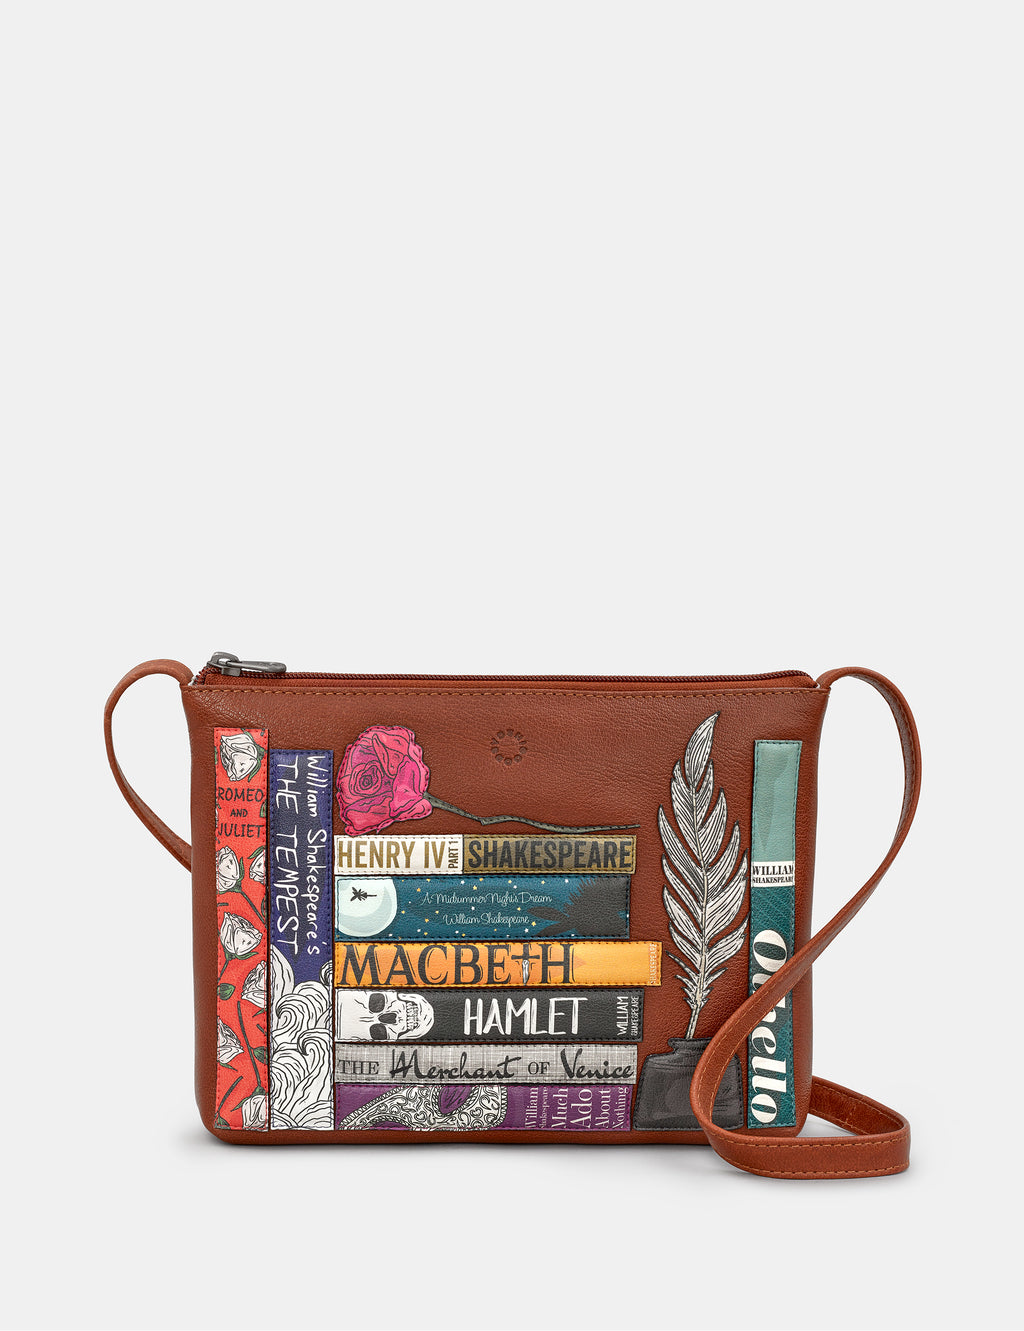 Shakespeare Bookworm Brown Leather Cross Body Bag